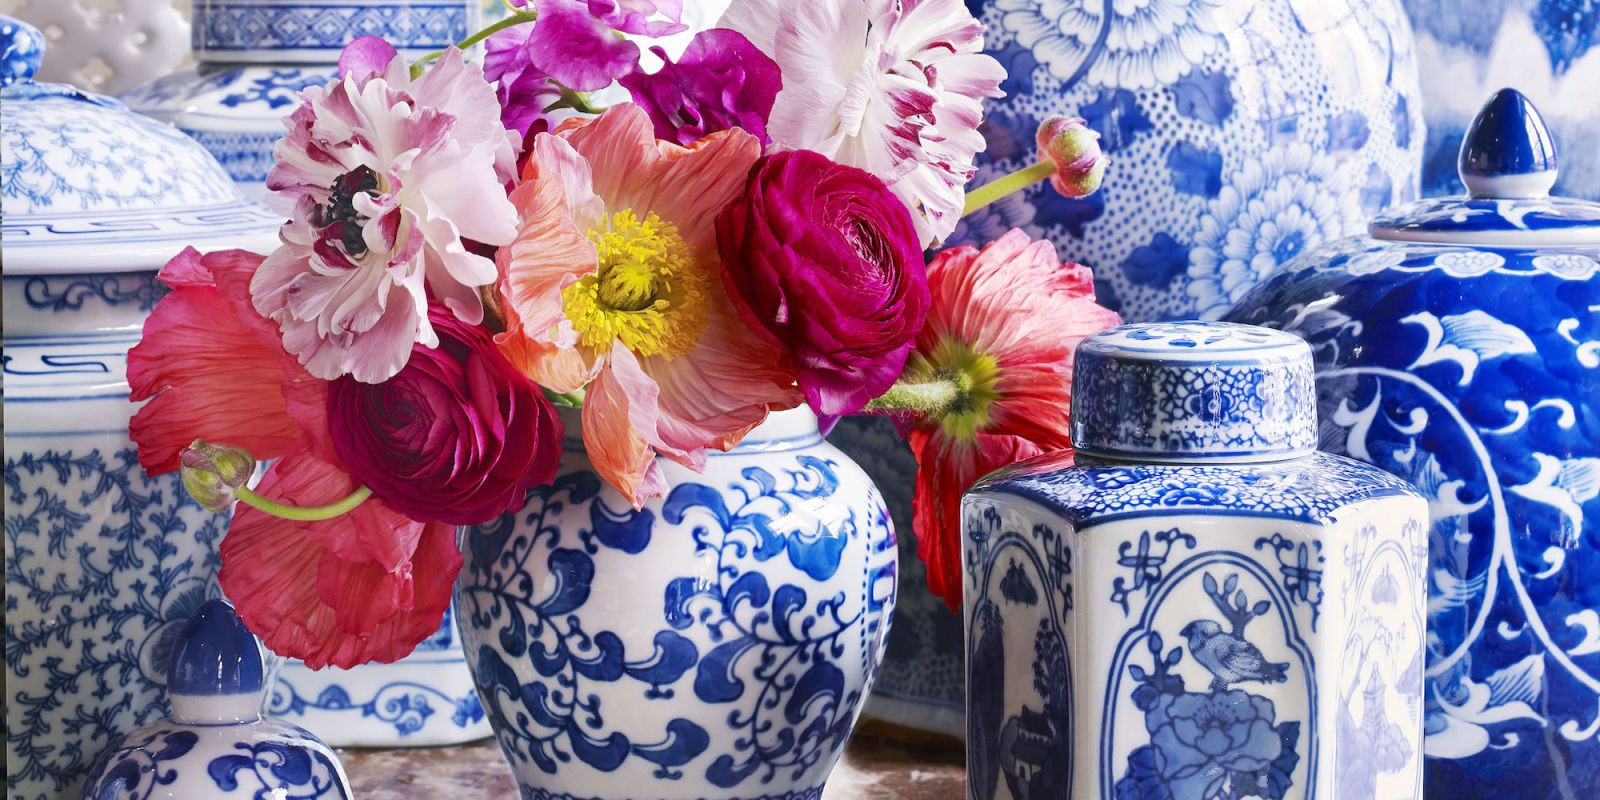 21 Lovable Blue and White Jars and Vases 2023 free download blue and white jars and vases of 5 things you didnt know about ginger jars loves pinterest within 5 things you did not know about ginger gars house beautiful